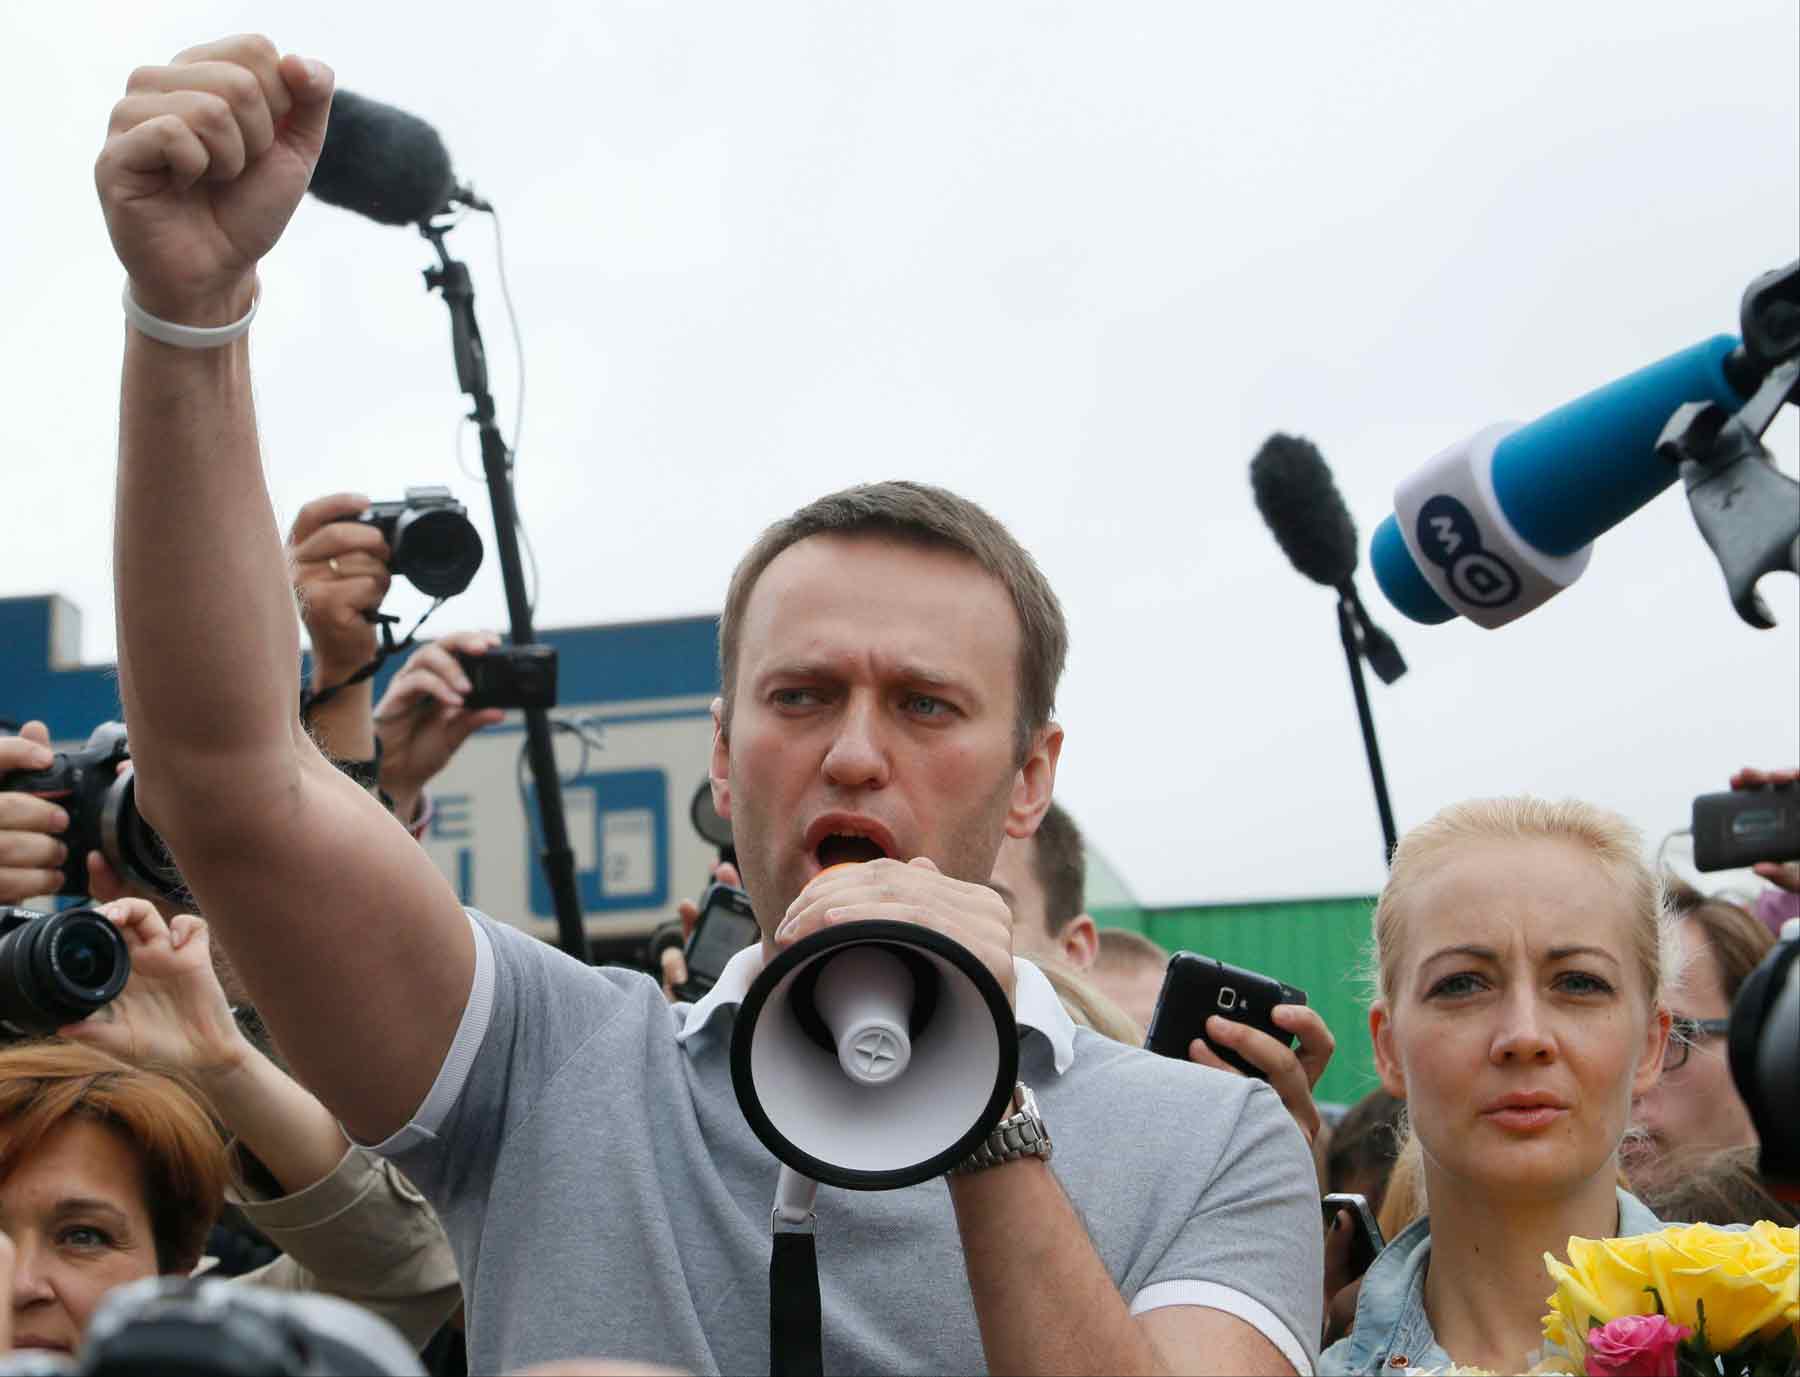 Russian opposition leader Alexei Navalny, foreground center, his wife Yulia, left, and his former colleague Pyotr Ofitserov, second left in front, address supporters and journalists after arriving from Kirov at a railway station in Moscow, Russia, Saturday, July 20, 2013